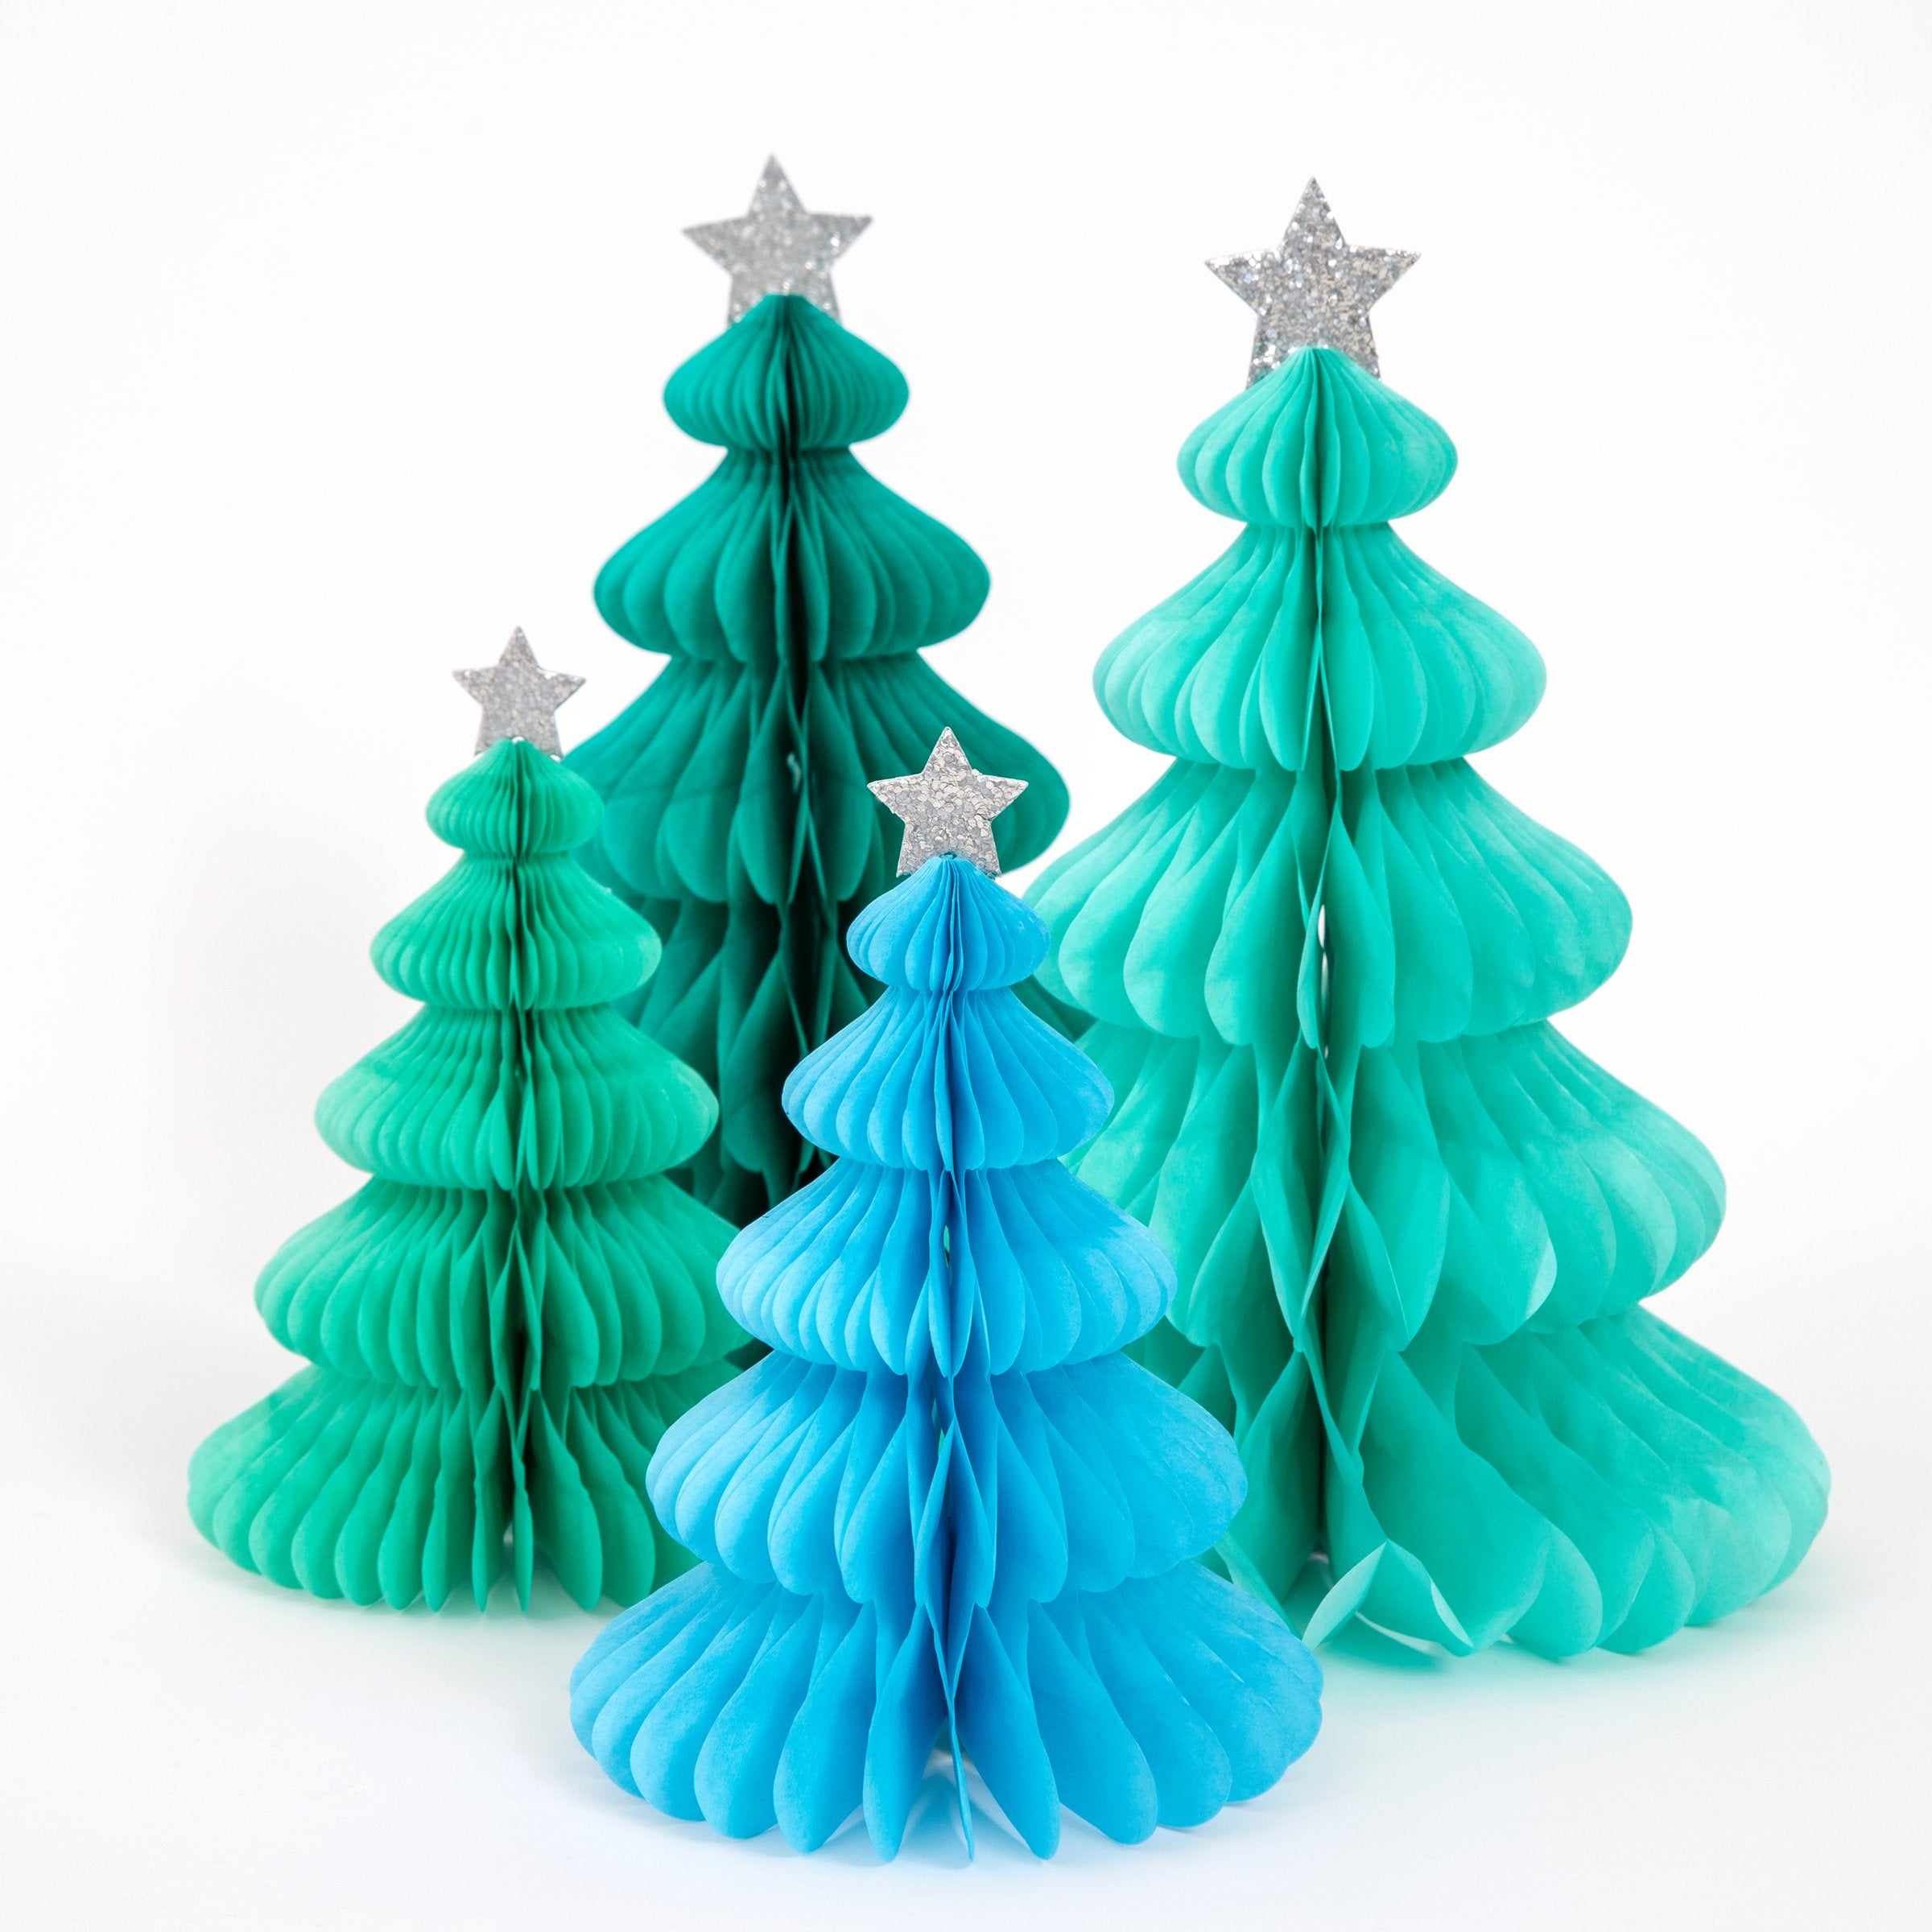 These beautiful honeycomb decorations are made from tissue paper with shining silver stars on top.